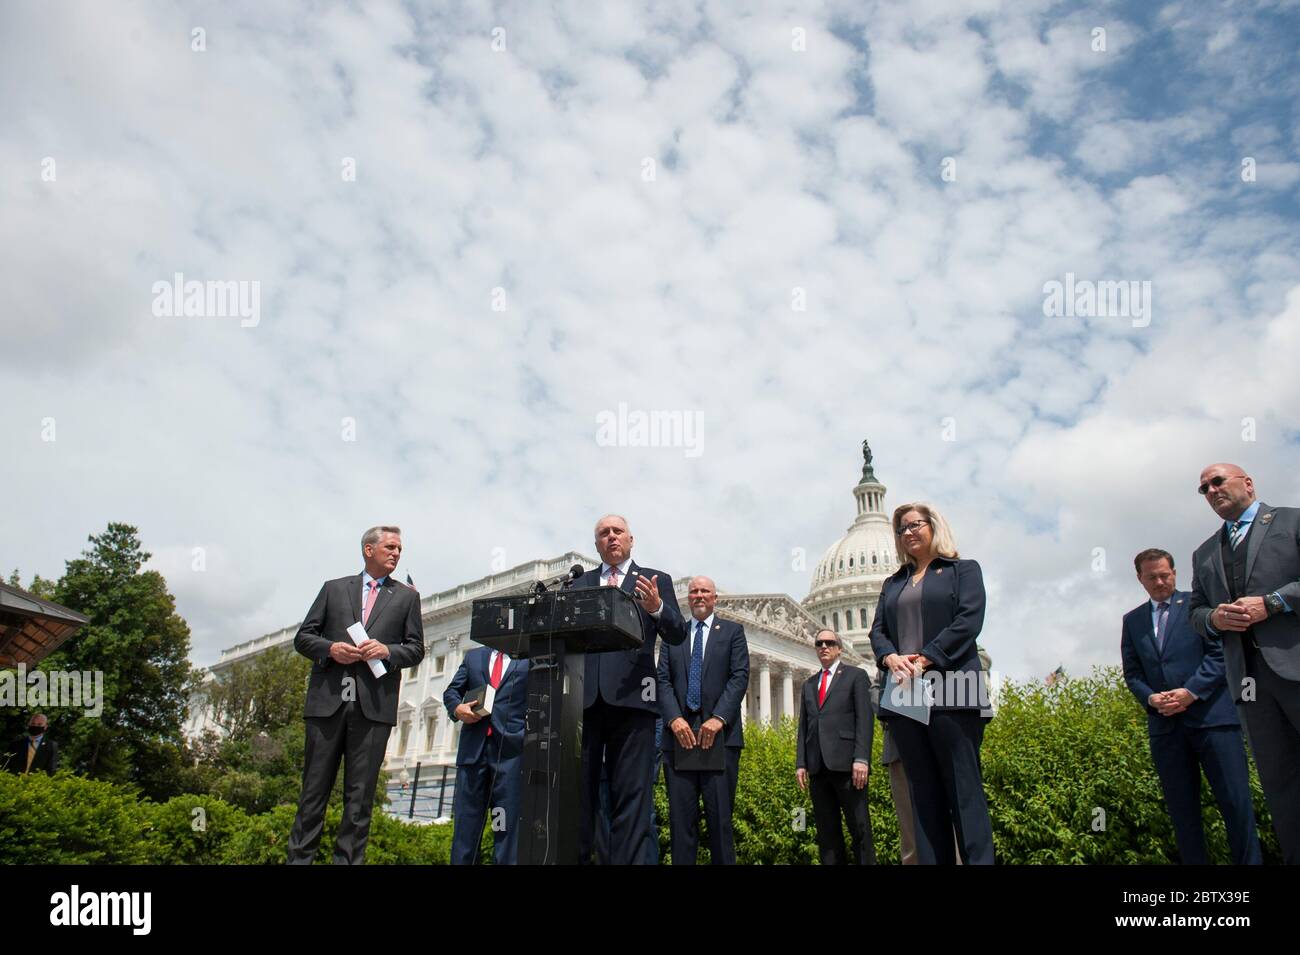 House Minority Whip Rep. Steve Scalise (R-LA, center) offers remarks as he is joined by House Minority Leader Rep. Kevin McCarthy (R-Calif., left), House GOP Conference Chairwoman Liz Cheney (R-WY) and others, to announce that Republican leaders have filed a lawsuit against House Speaker Nancy Pelosi and congressional officials in an effort to block the House of Representatives from using a proxy voting system to allow for remote voting during the coronavirus pandemic, outside of the U.S. Capitol in Washington, DC., Wednesday, May 27, 2020. Credit: Rod Lamkey/CNP | usage worldwide Stock Photo